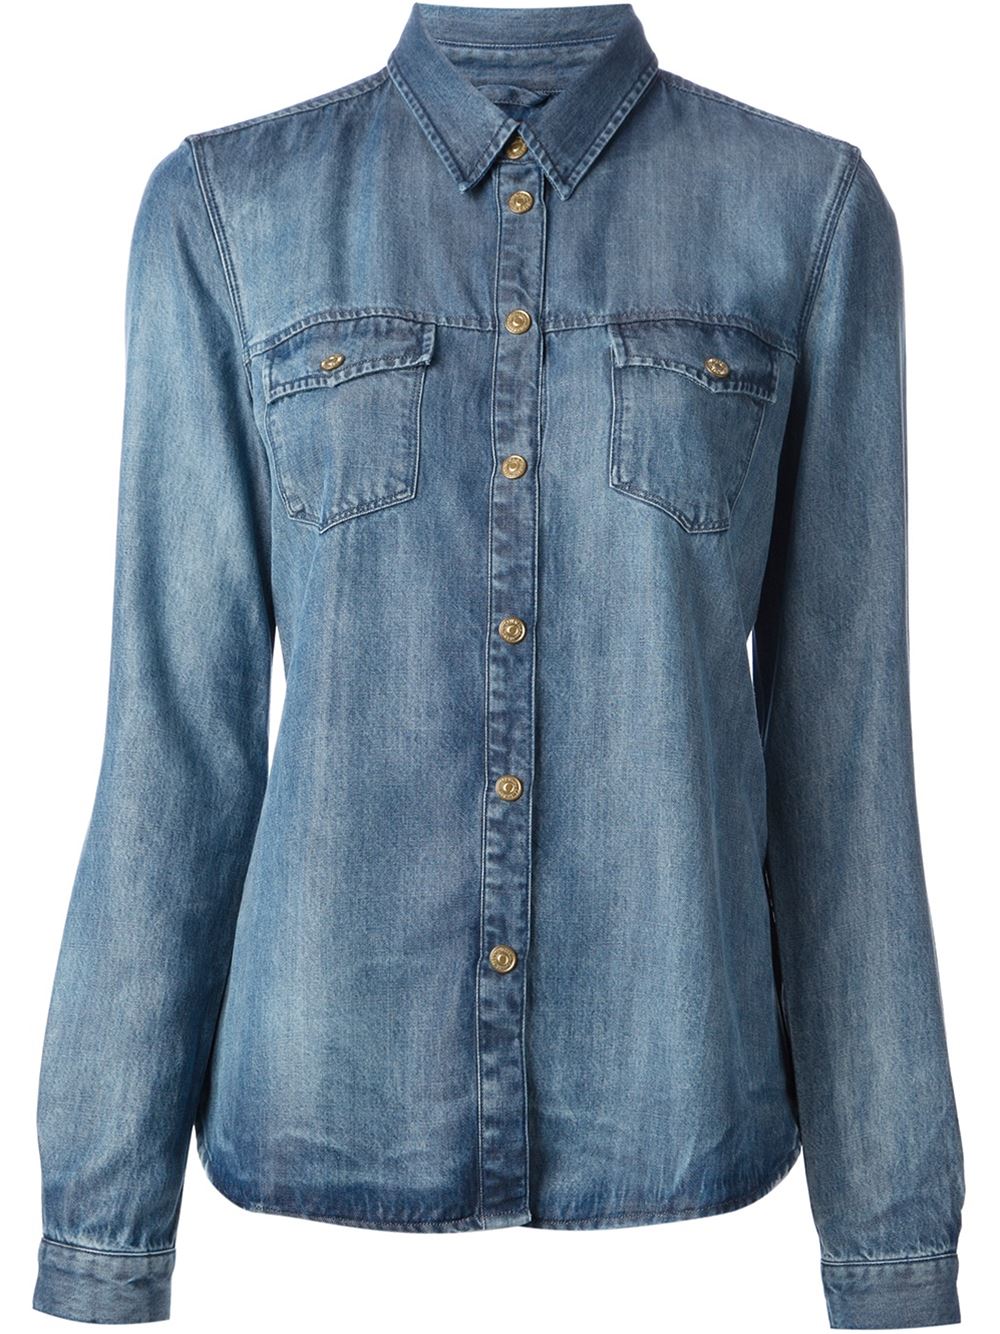 Faded indigo cotton denim shirt from 7 For All Mankind